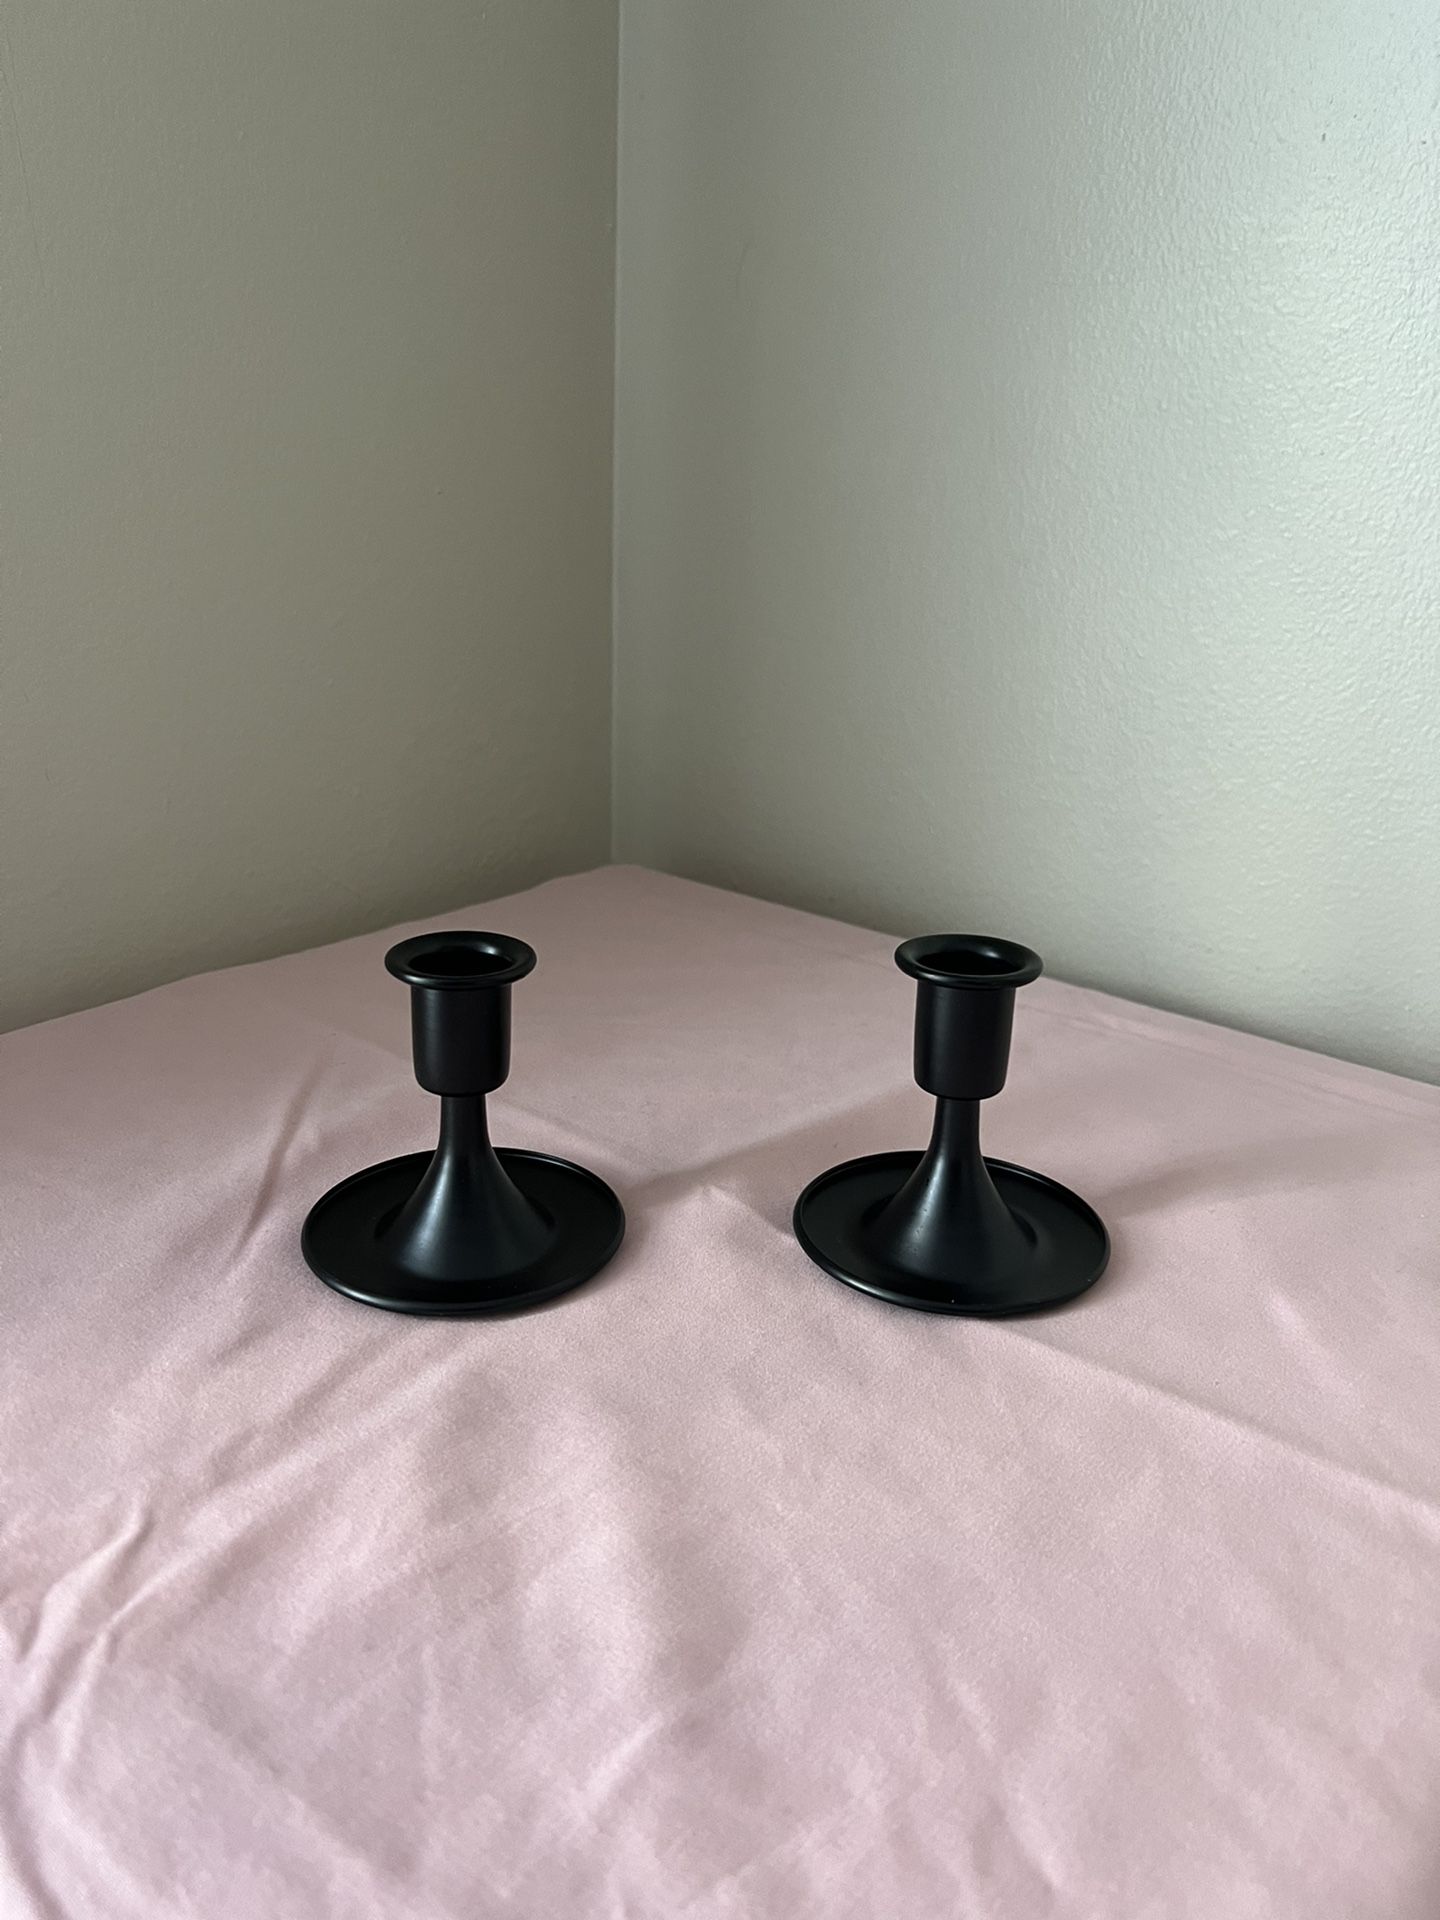 Candlestick Candle Holders